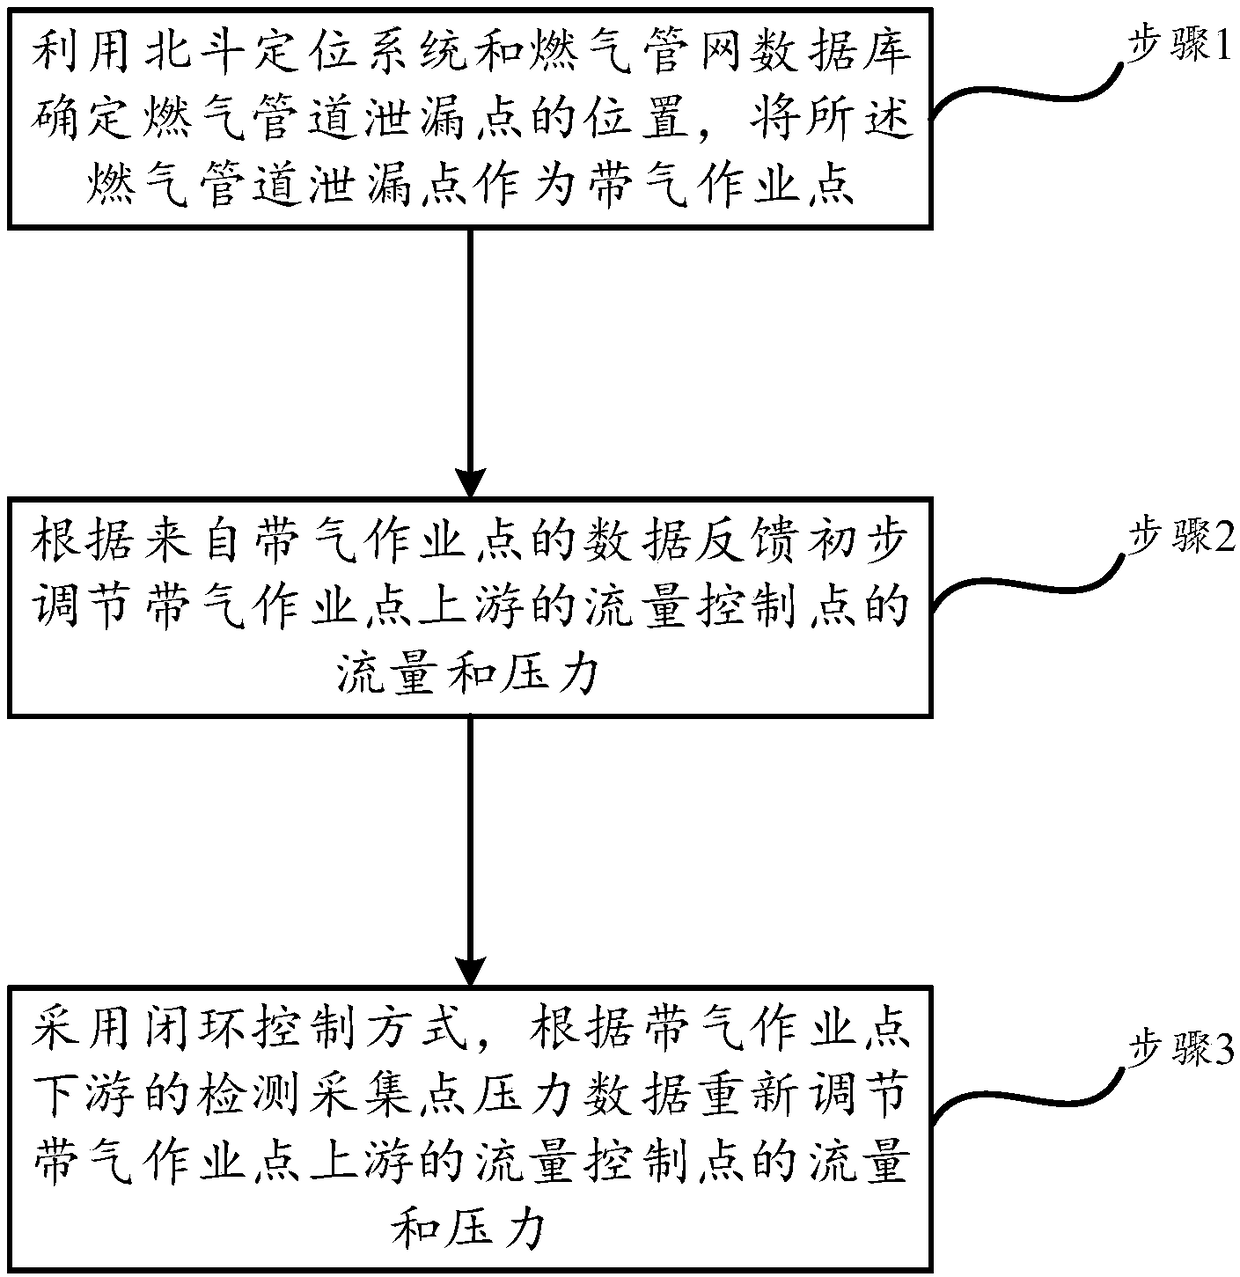 Intelligent pressure control method for city gas pipeline with gas operation based on Beidou positioning